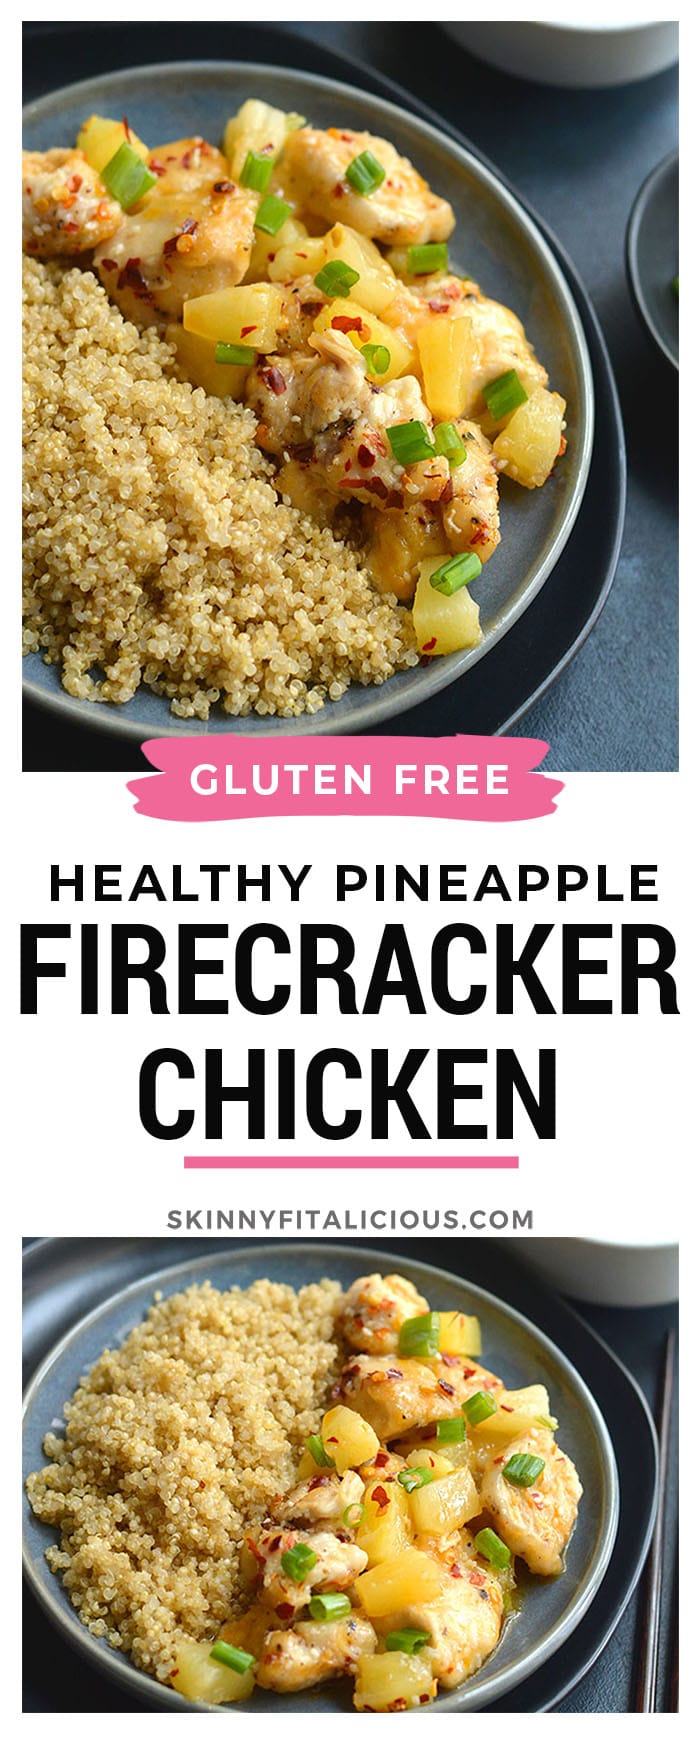 Pineapple Firecracker Chicken With Quinoa! This sweet and savory dish makes tender and moist chicken. Easy to make in a skillet and family approved! Gluten Free + Low Calorie